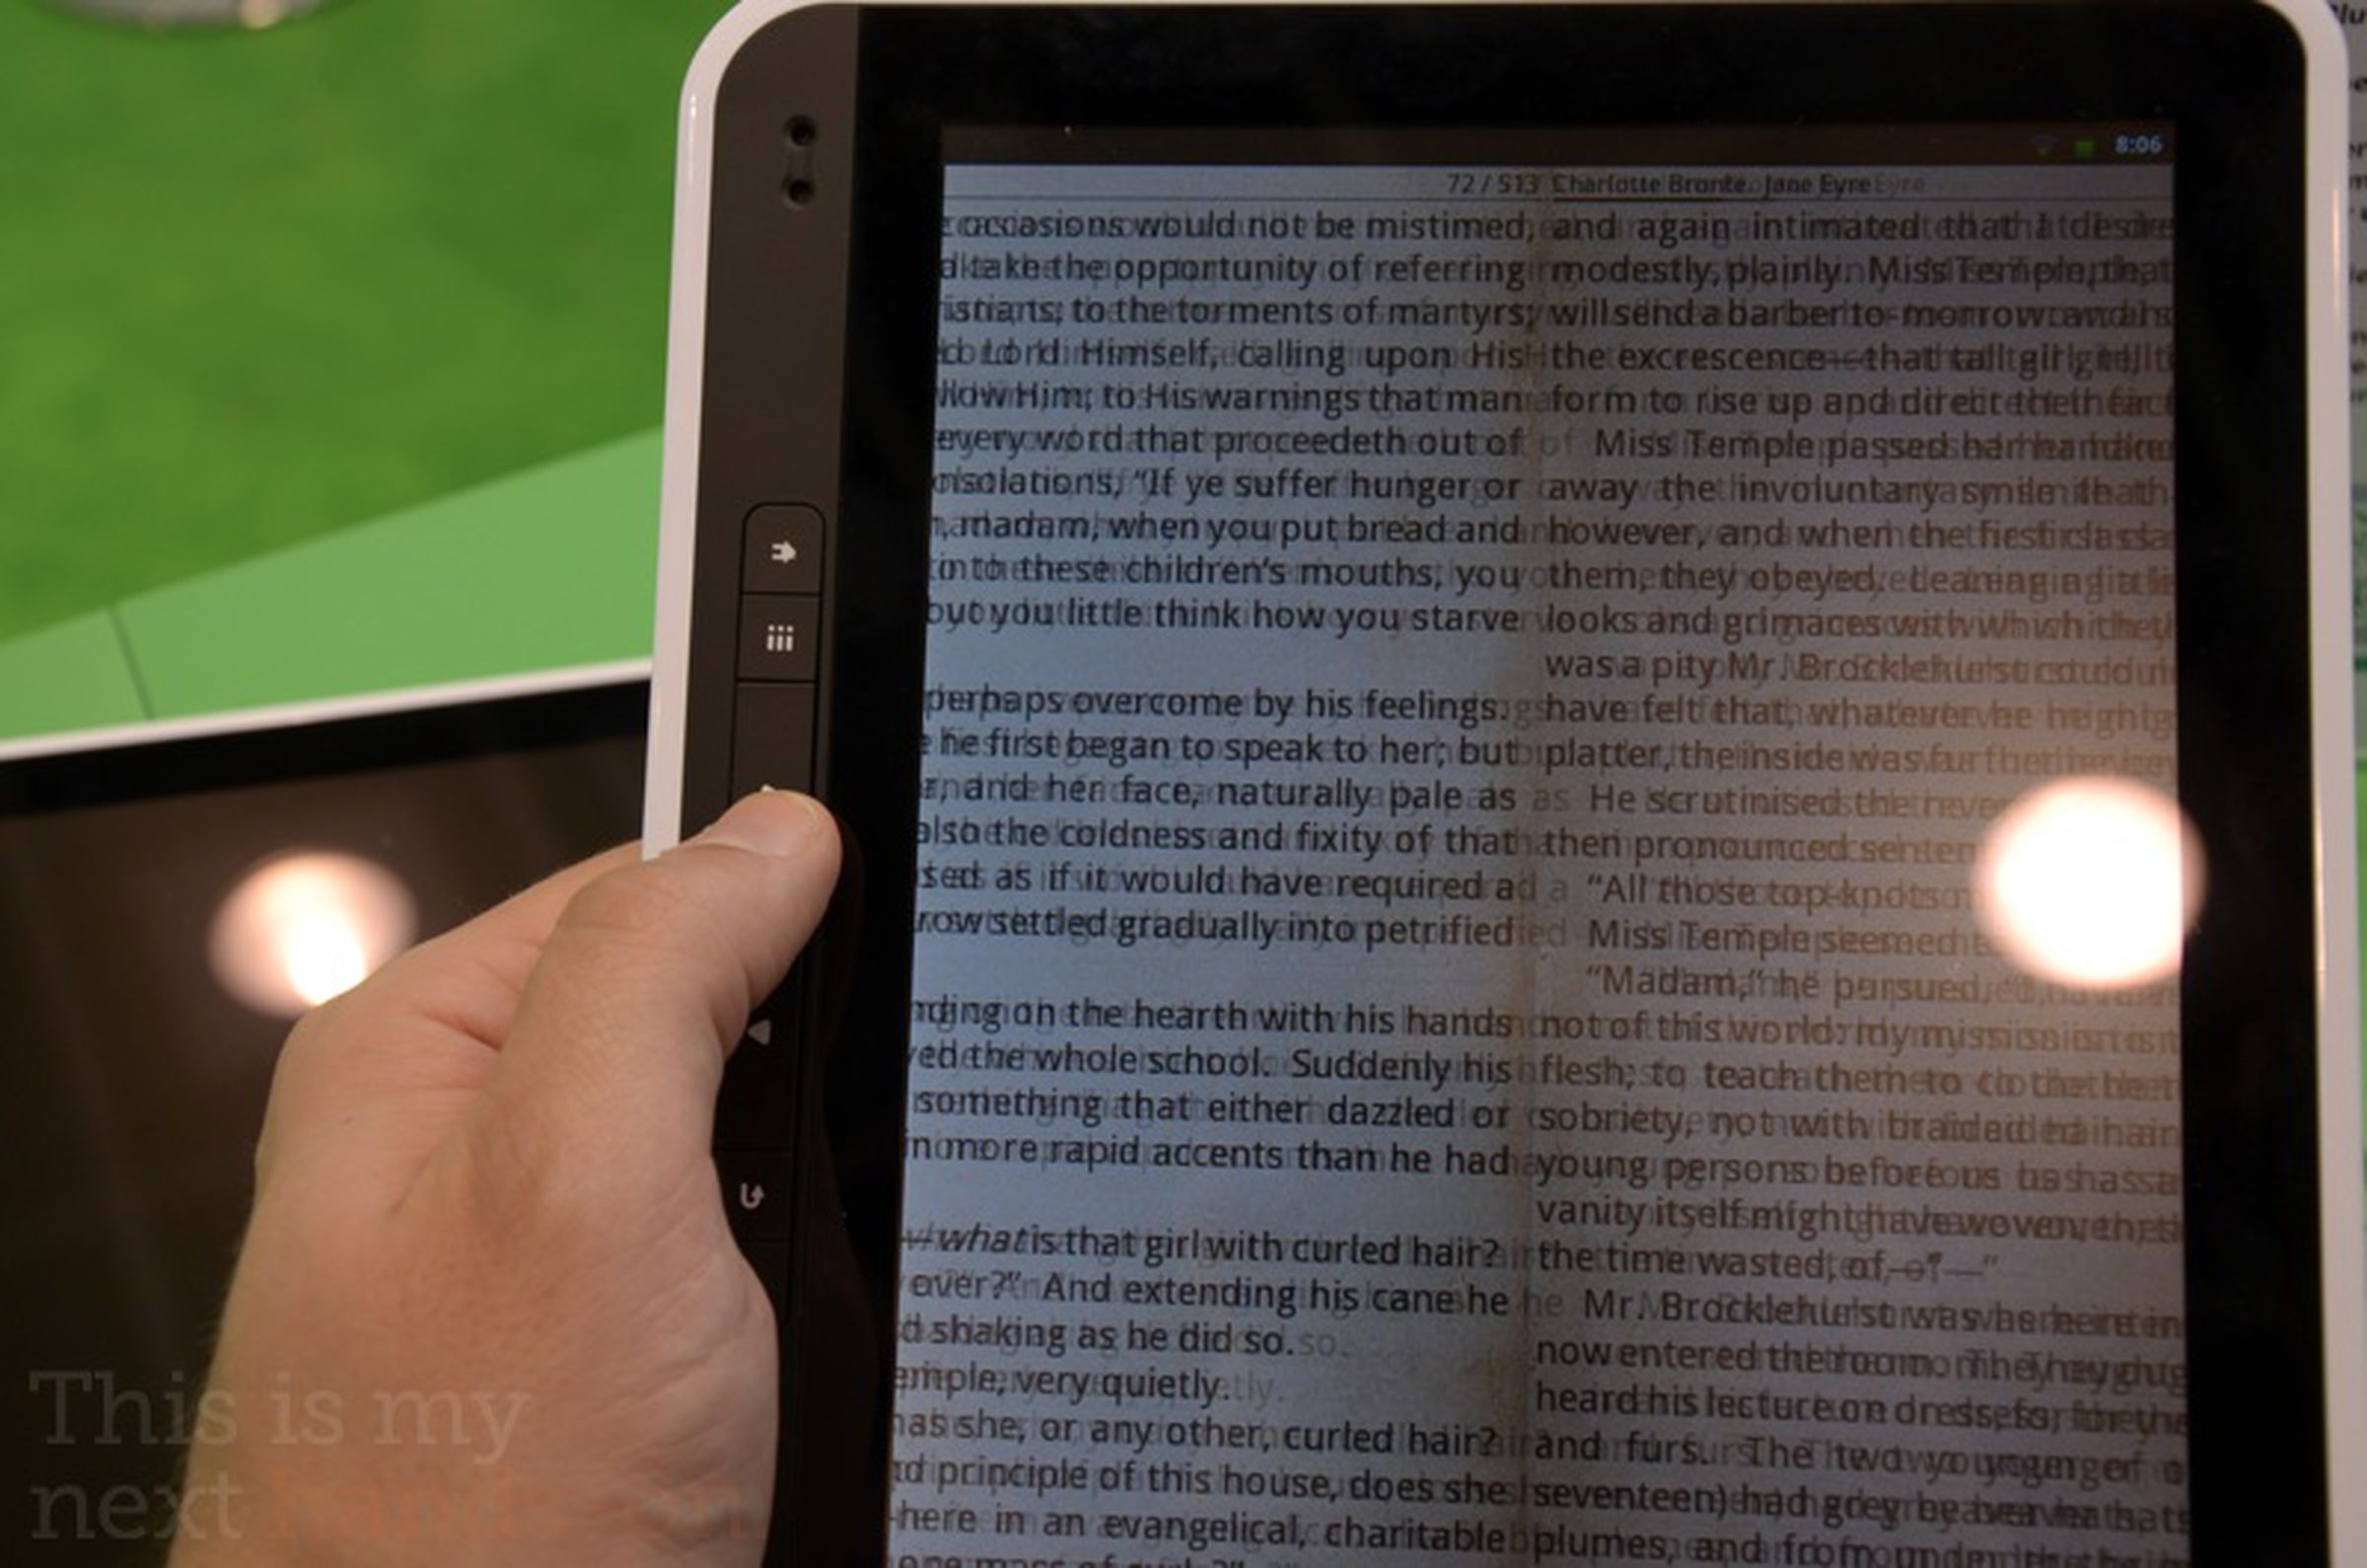 PocketBook A10 reading tablet hands-on photos